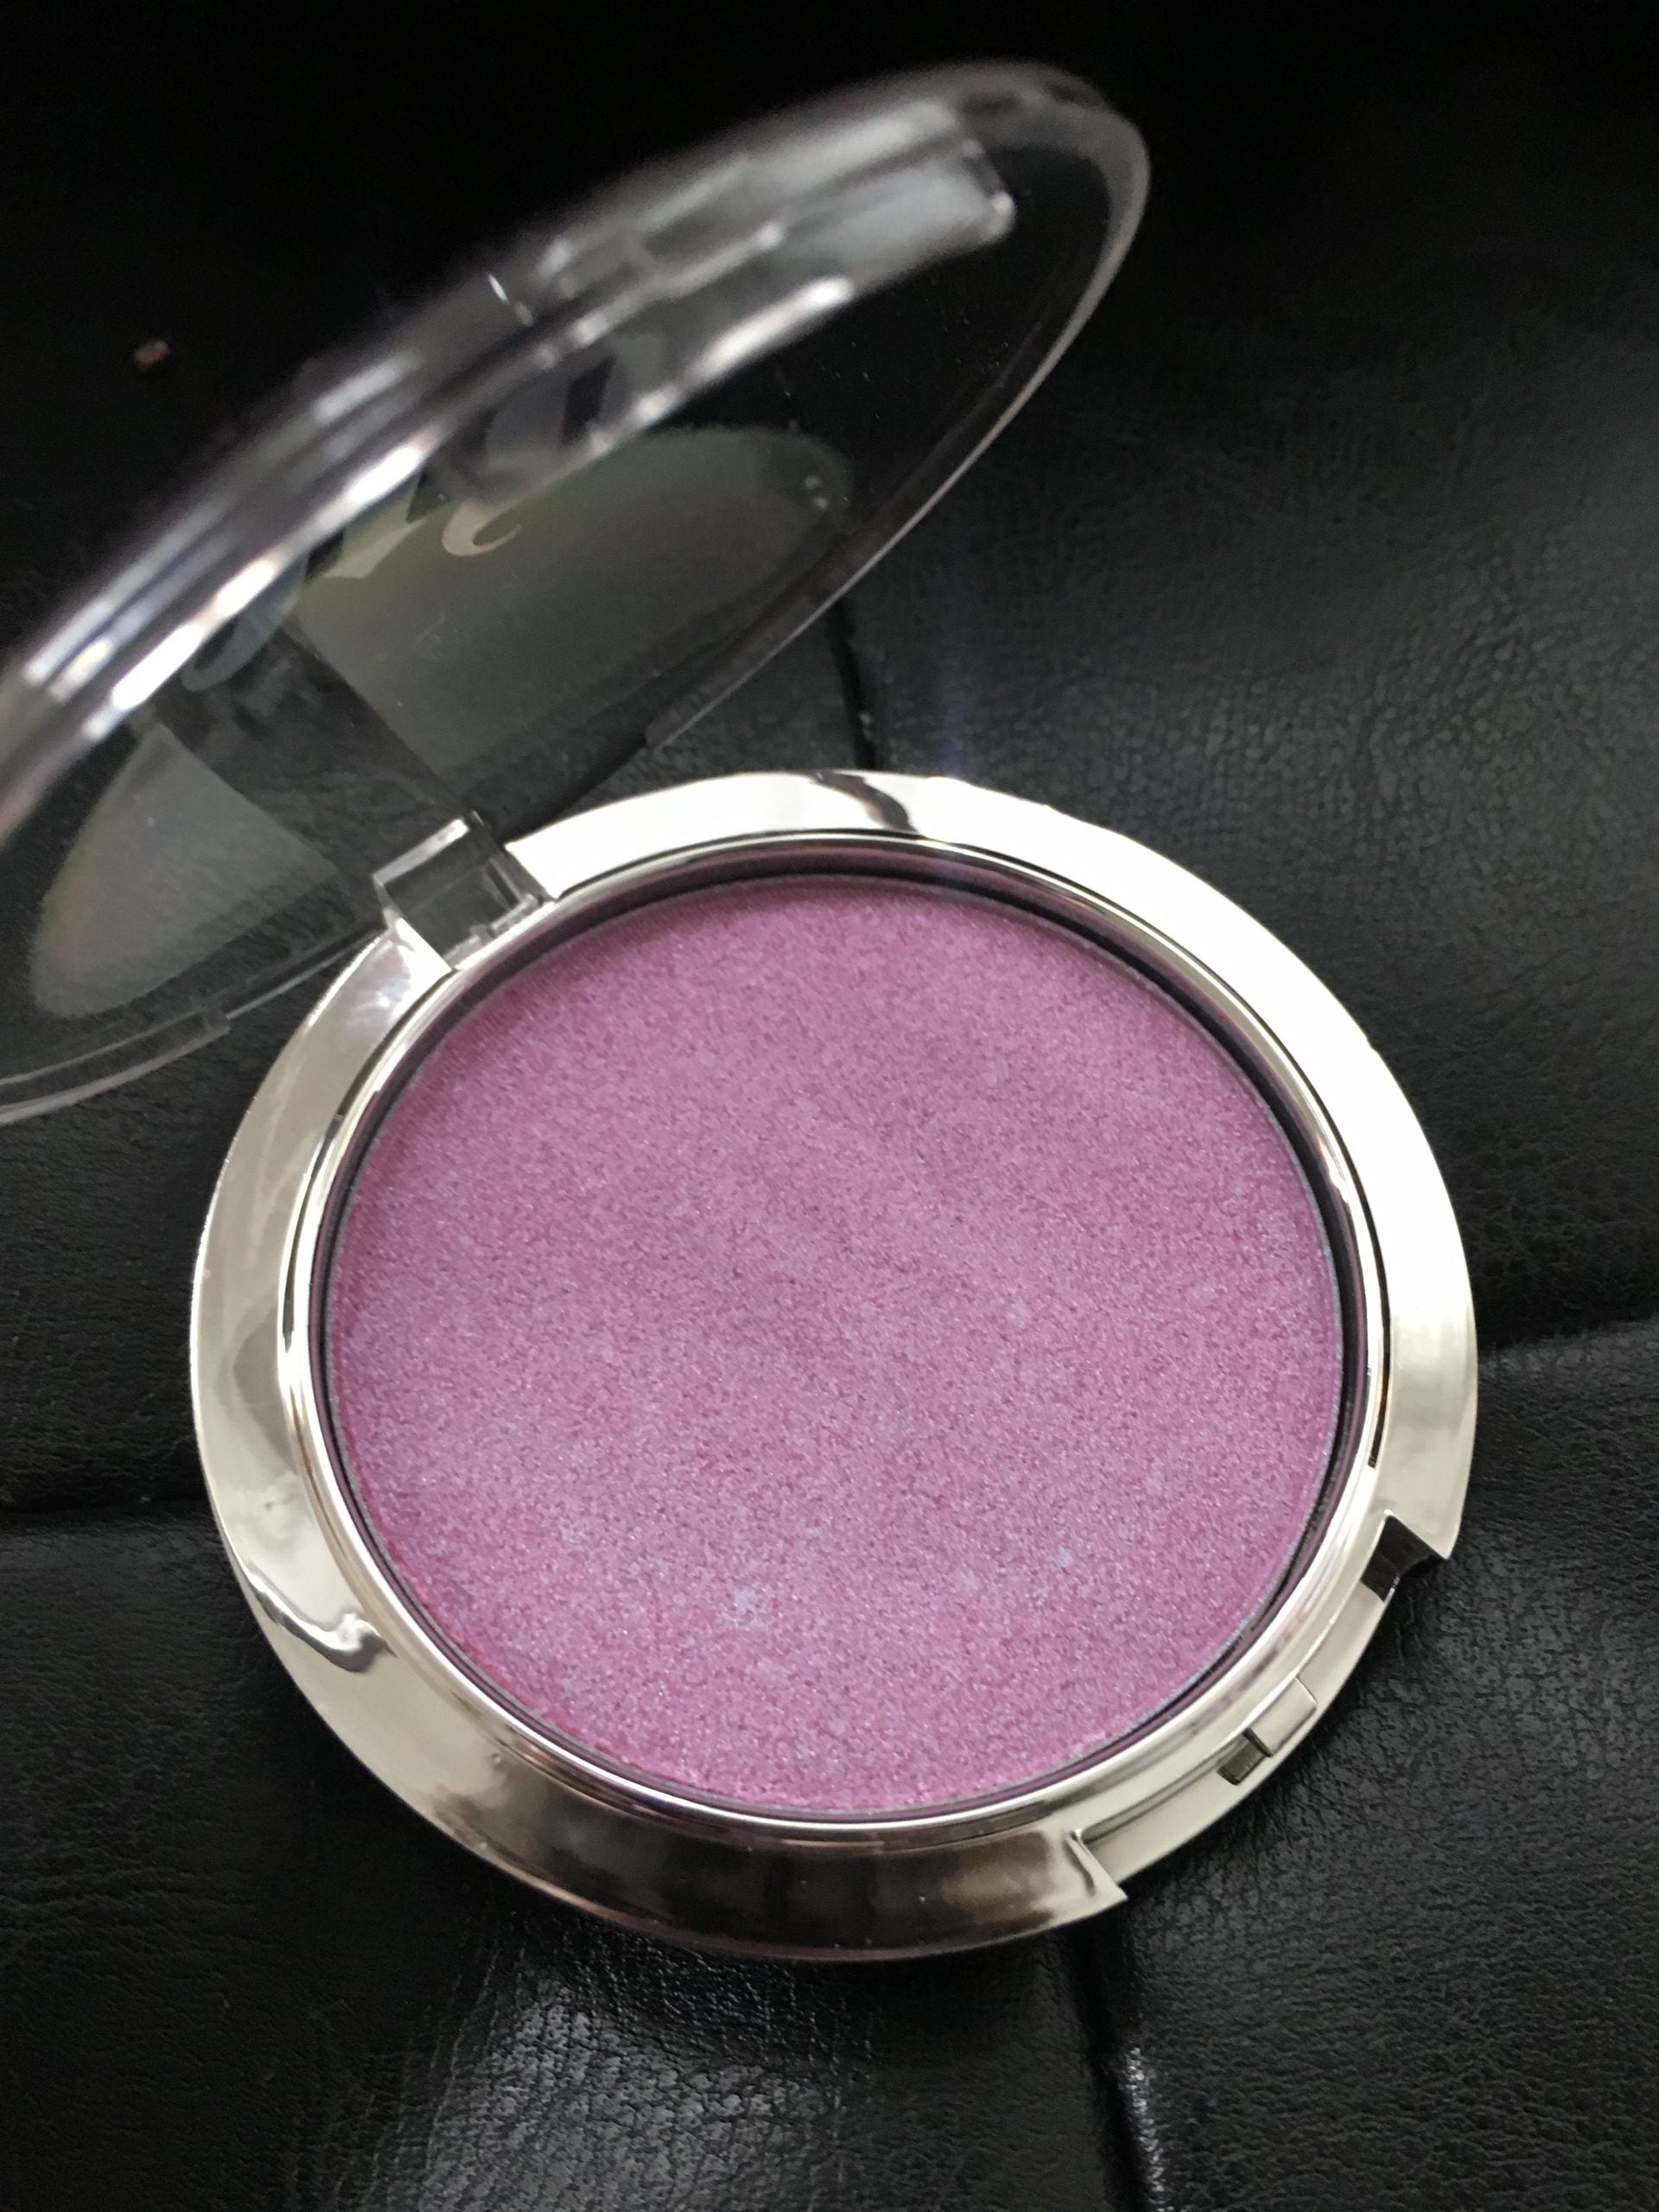 Review, Photos, Swatches, Makeup Trend 2018, 2019, 2020: Urban Decay Disco Queen Holographic Highlight Powder, Highlighter Stick